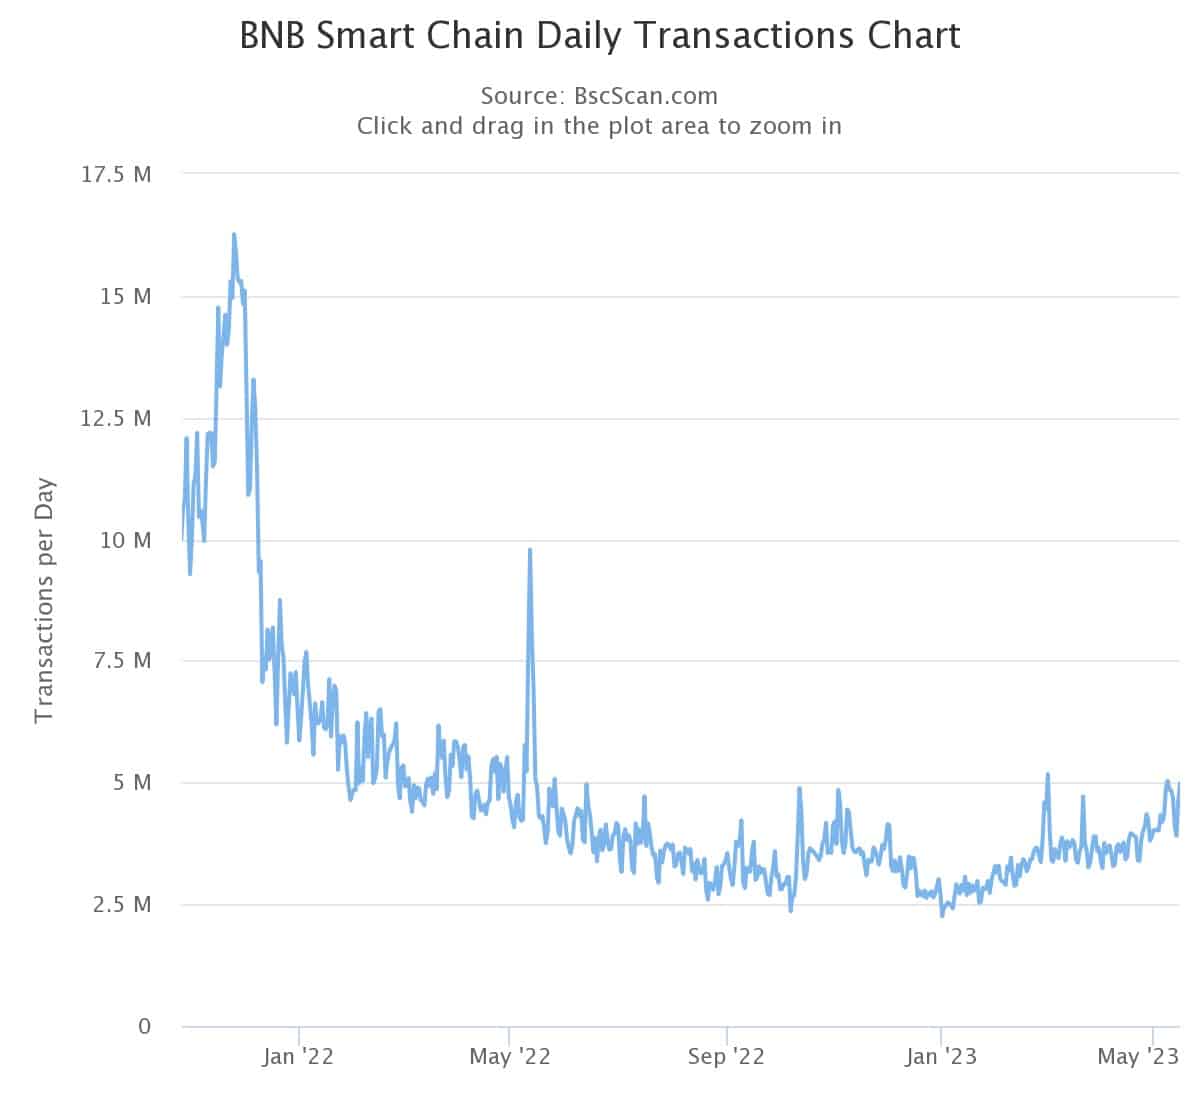 Figure 2 - Number of daily transactions on the BSC